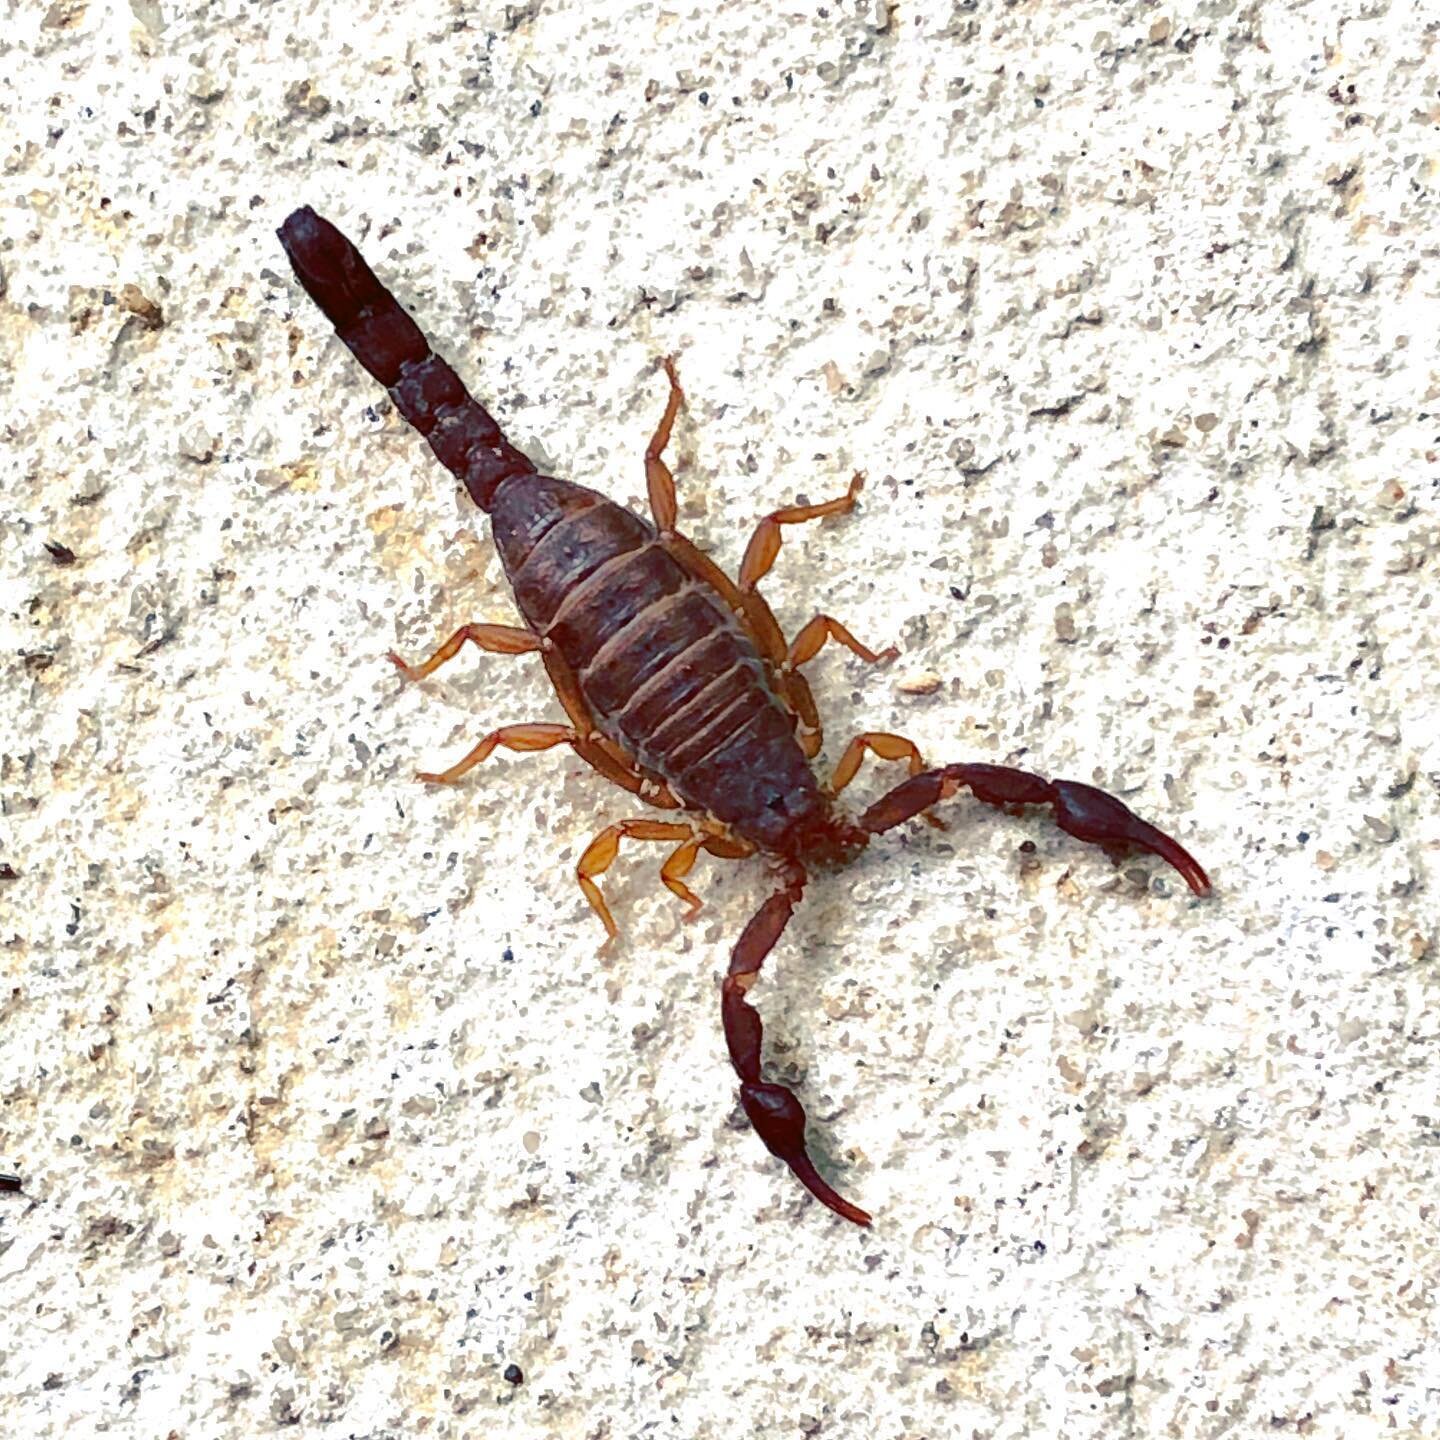 Well hello there little one! About 1 1/2&rdquo; long. #scorpion #cumberlandplateau #grundycounty #tennessee #critter #nature